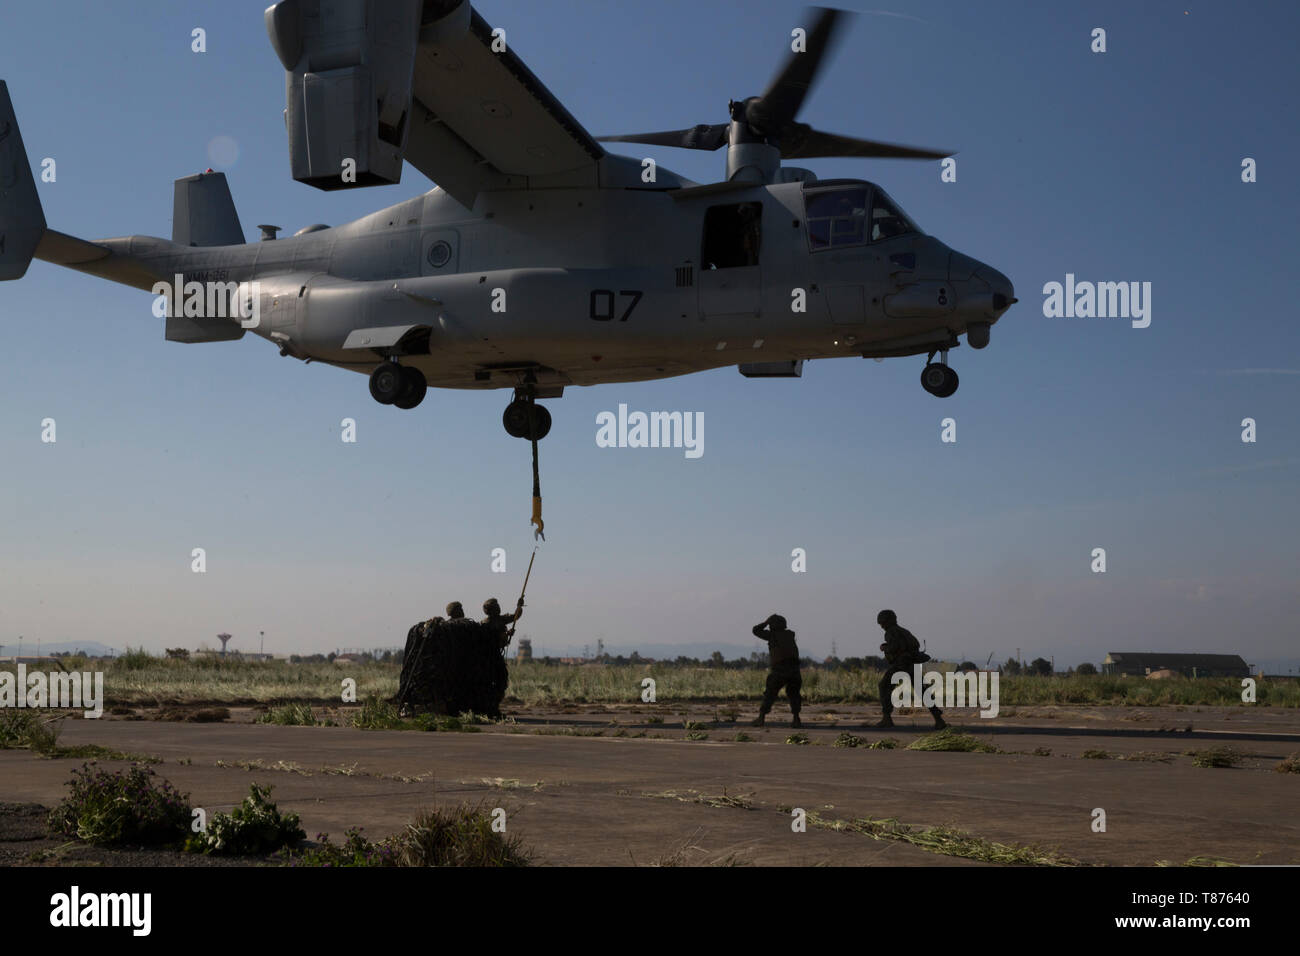 U.S. Marines with Special Purpose Marine Air-Ground Task Force-Crisis Response-Africa 19.2, Marine Forces Europe and Africa, reach for a cargo hook under a U.S. Marine Corps MV-22B Osprey during external-lift training at Naval Air Station Sigonella, Italy, April 18, 2019. SPMAGTF-CR-AF is deployed to conduct crisis-response and theater-security operations in Africa and promote regional stability by conducting military-to-military training exercises throughout Europe and Africa. (U.S. Marine Corps photo by Staff Sgt. Mark E. Morrow Jr. ) Stock Photo